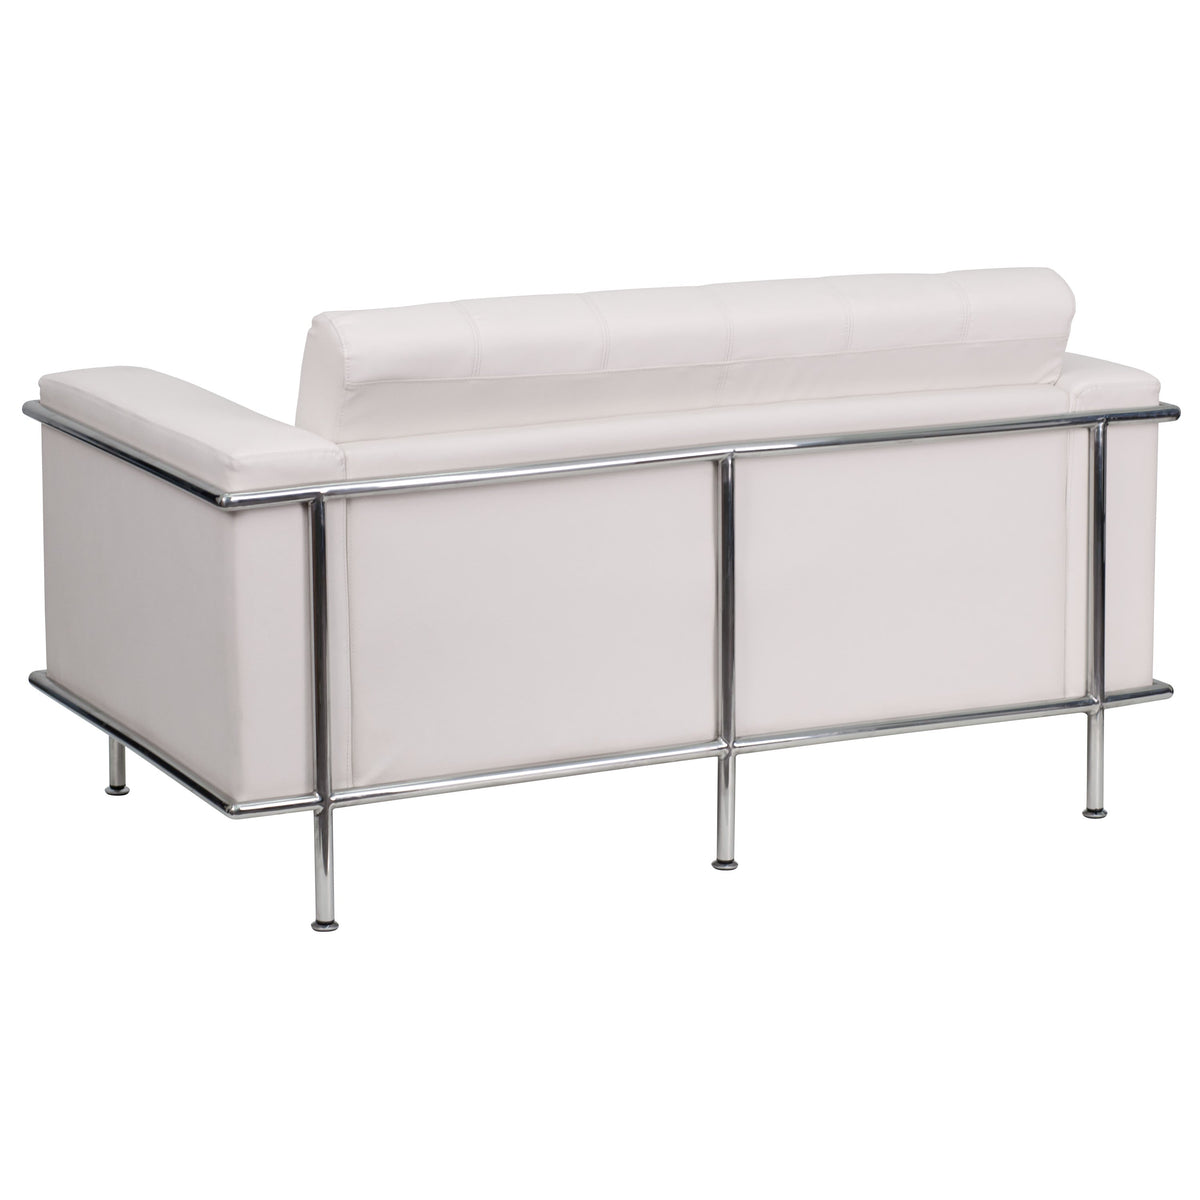 Melrose White |#| Contemporary White LeatherSoft Double Stitch Detail Loveseat w/Encasing Frame